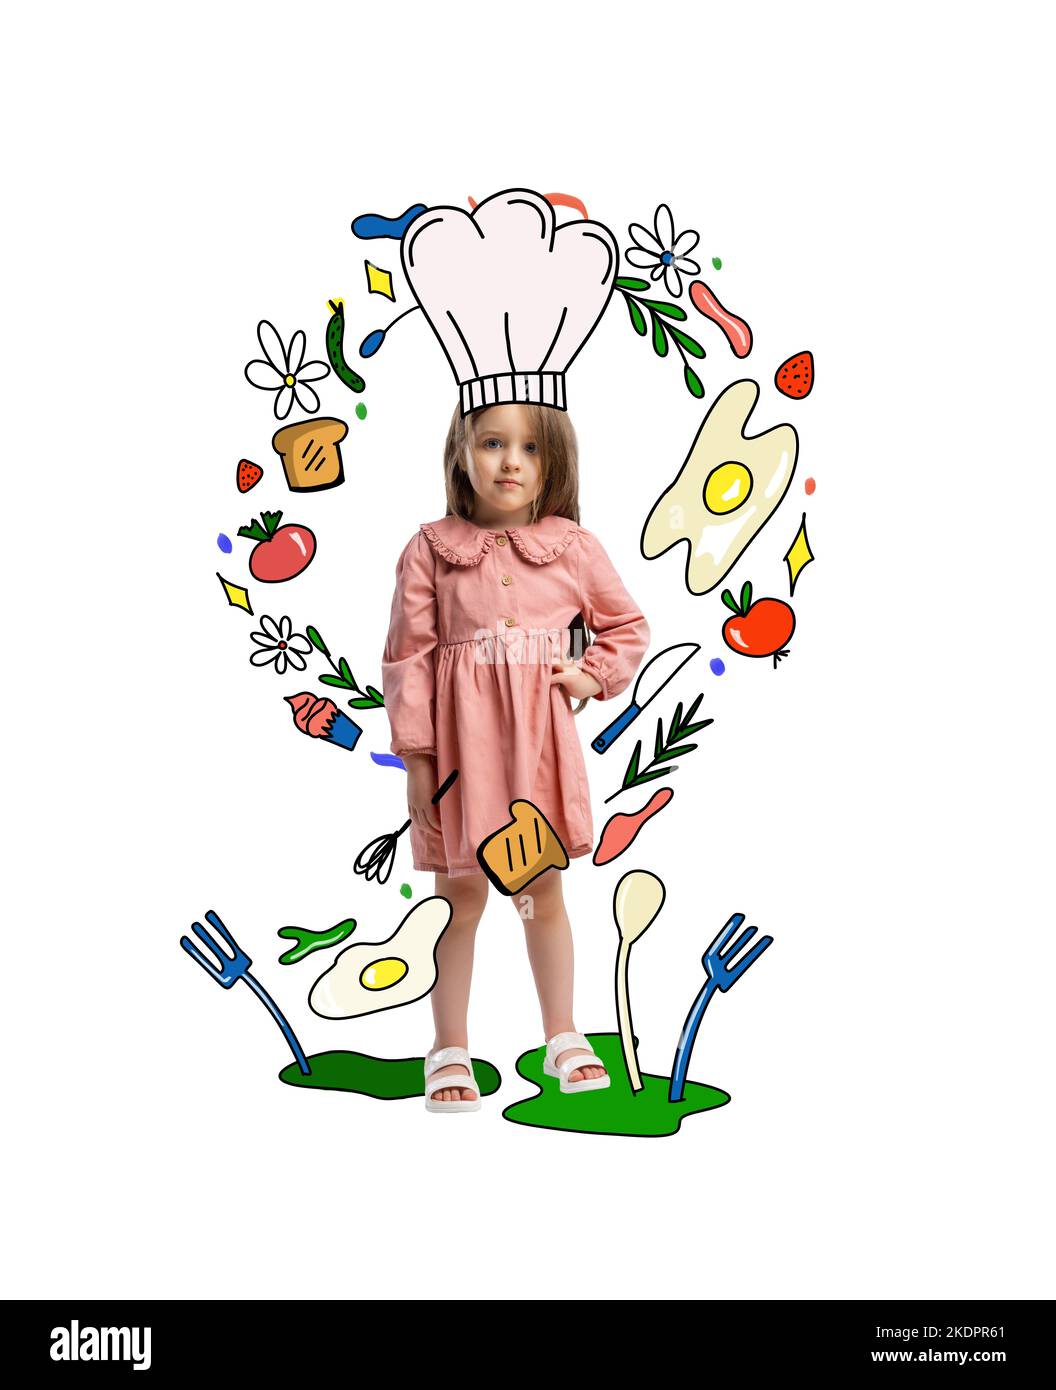 Creative colorful design. Contemporary art collage. Little cute girl, child dreaming to become a chef. Cooking activity Stock Photo